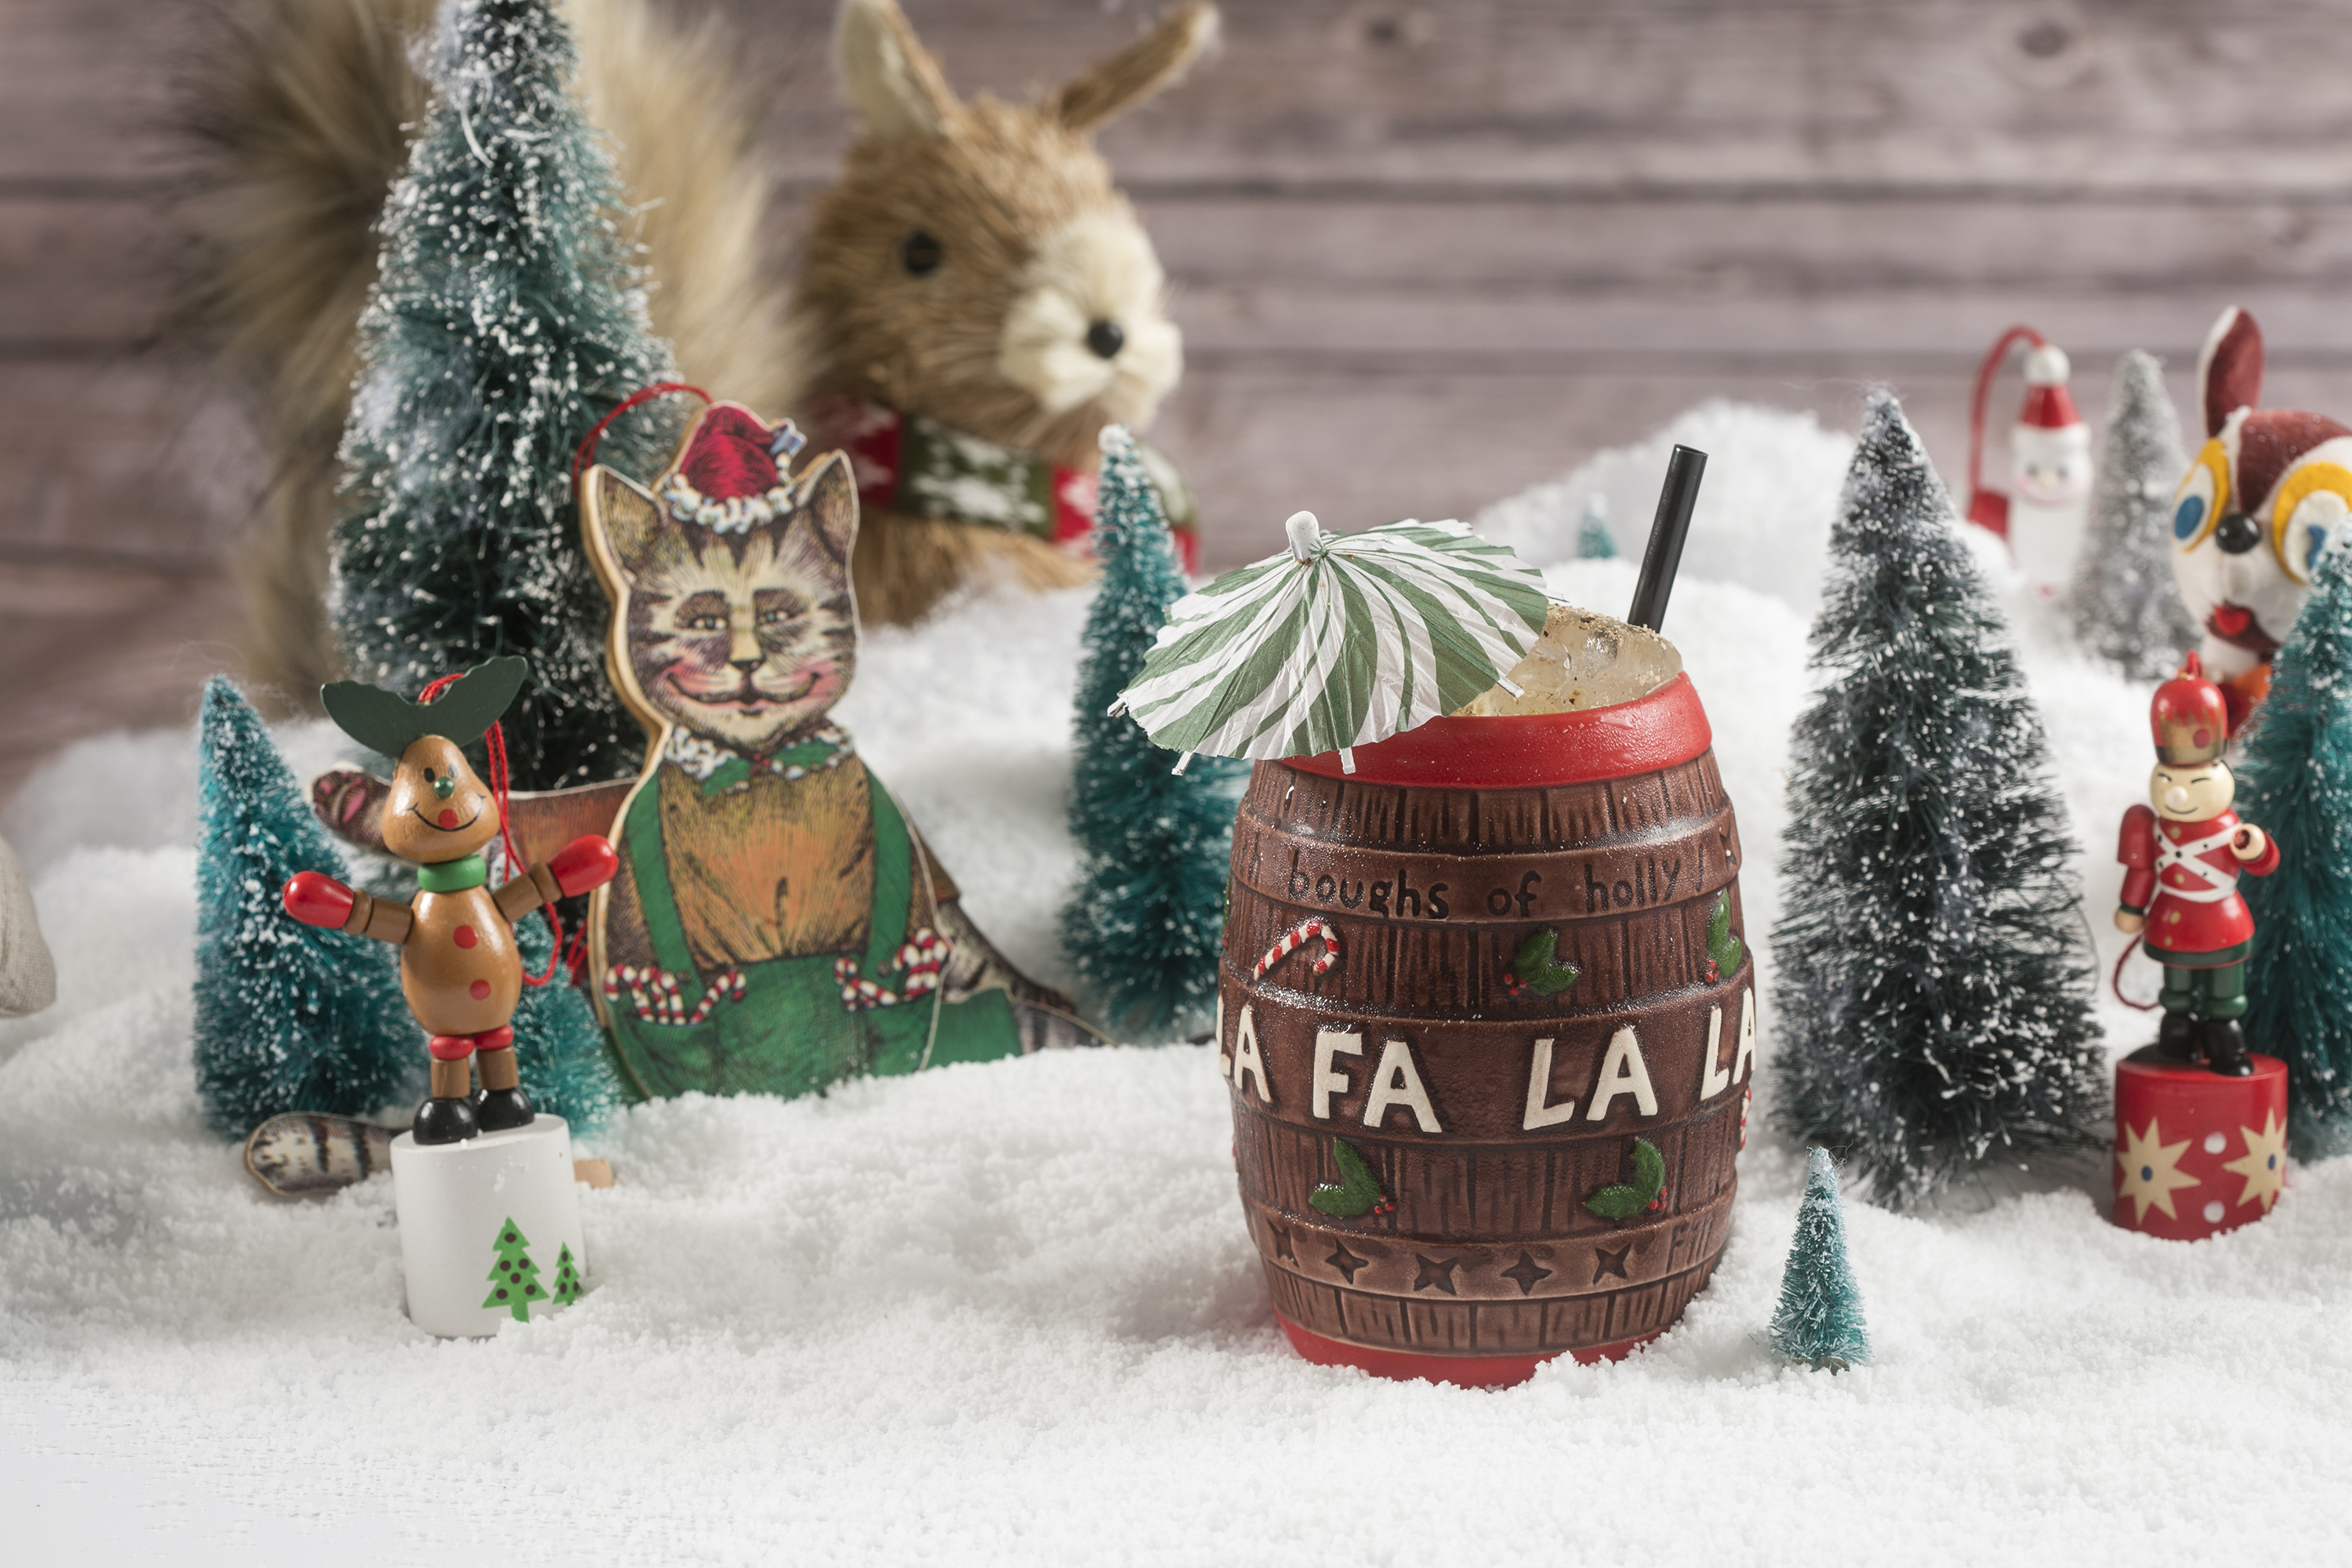 A tiki drink is served in a Christmas-themed cup shaped like a barrel with “fa la la” written on it. The drink is set on a Christmas backdrop with fake snow, trees, and other festive knick-knacks.